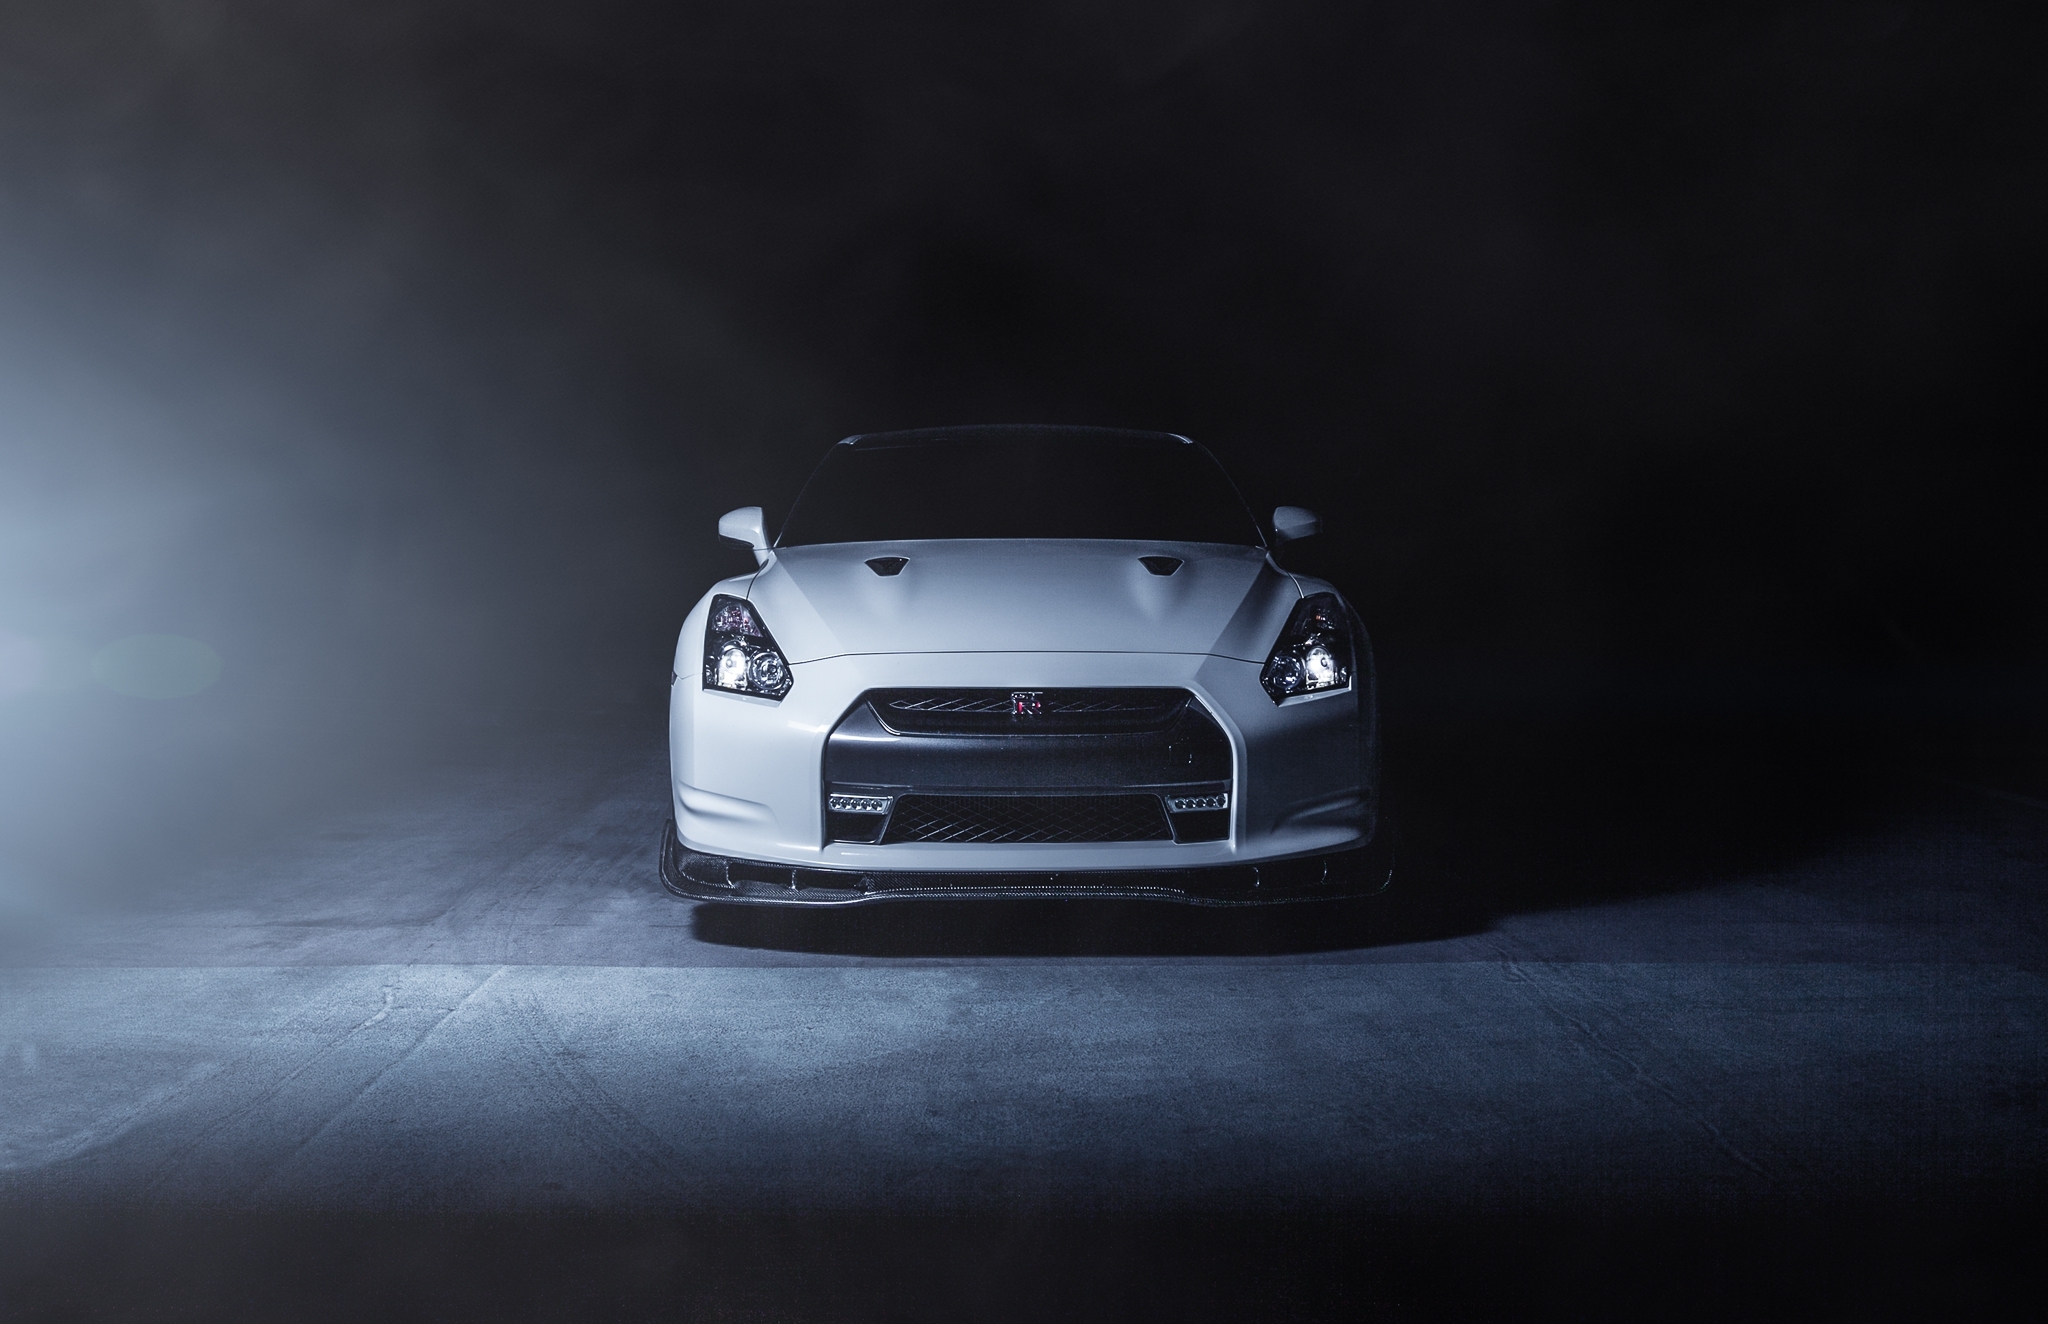 Best Gt-R wallpapers for phone screen